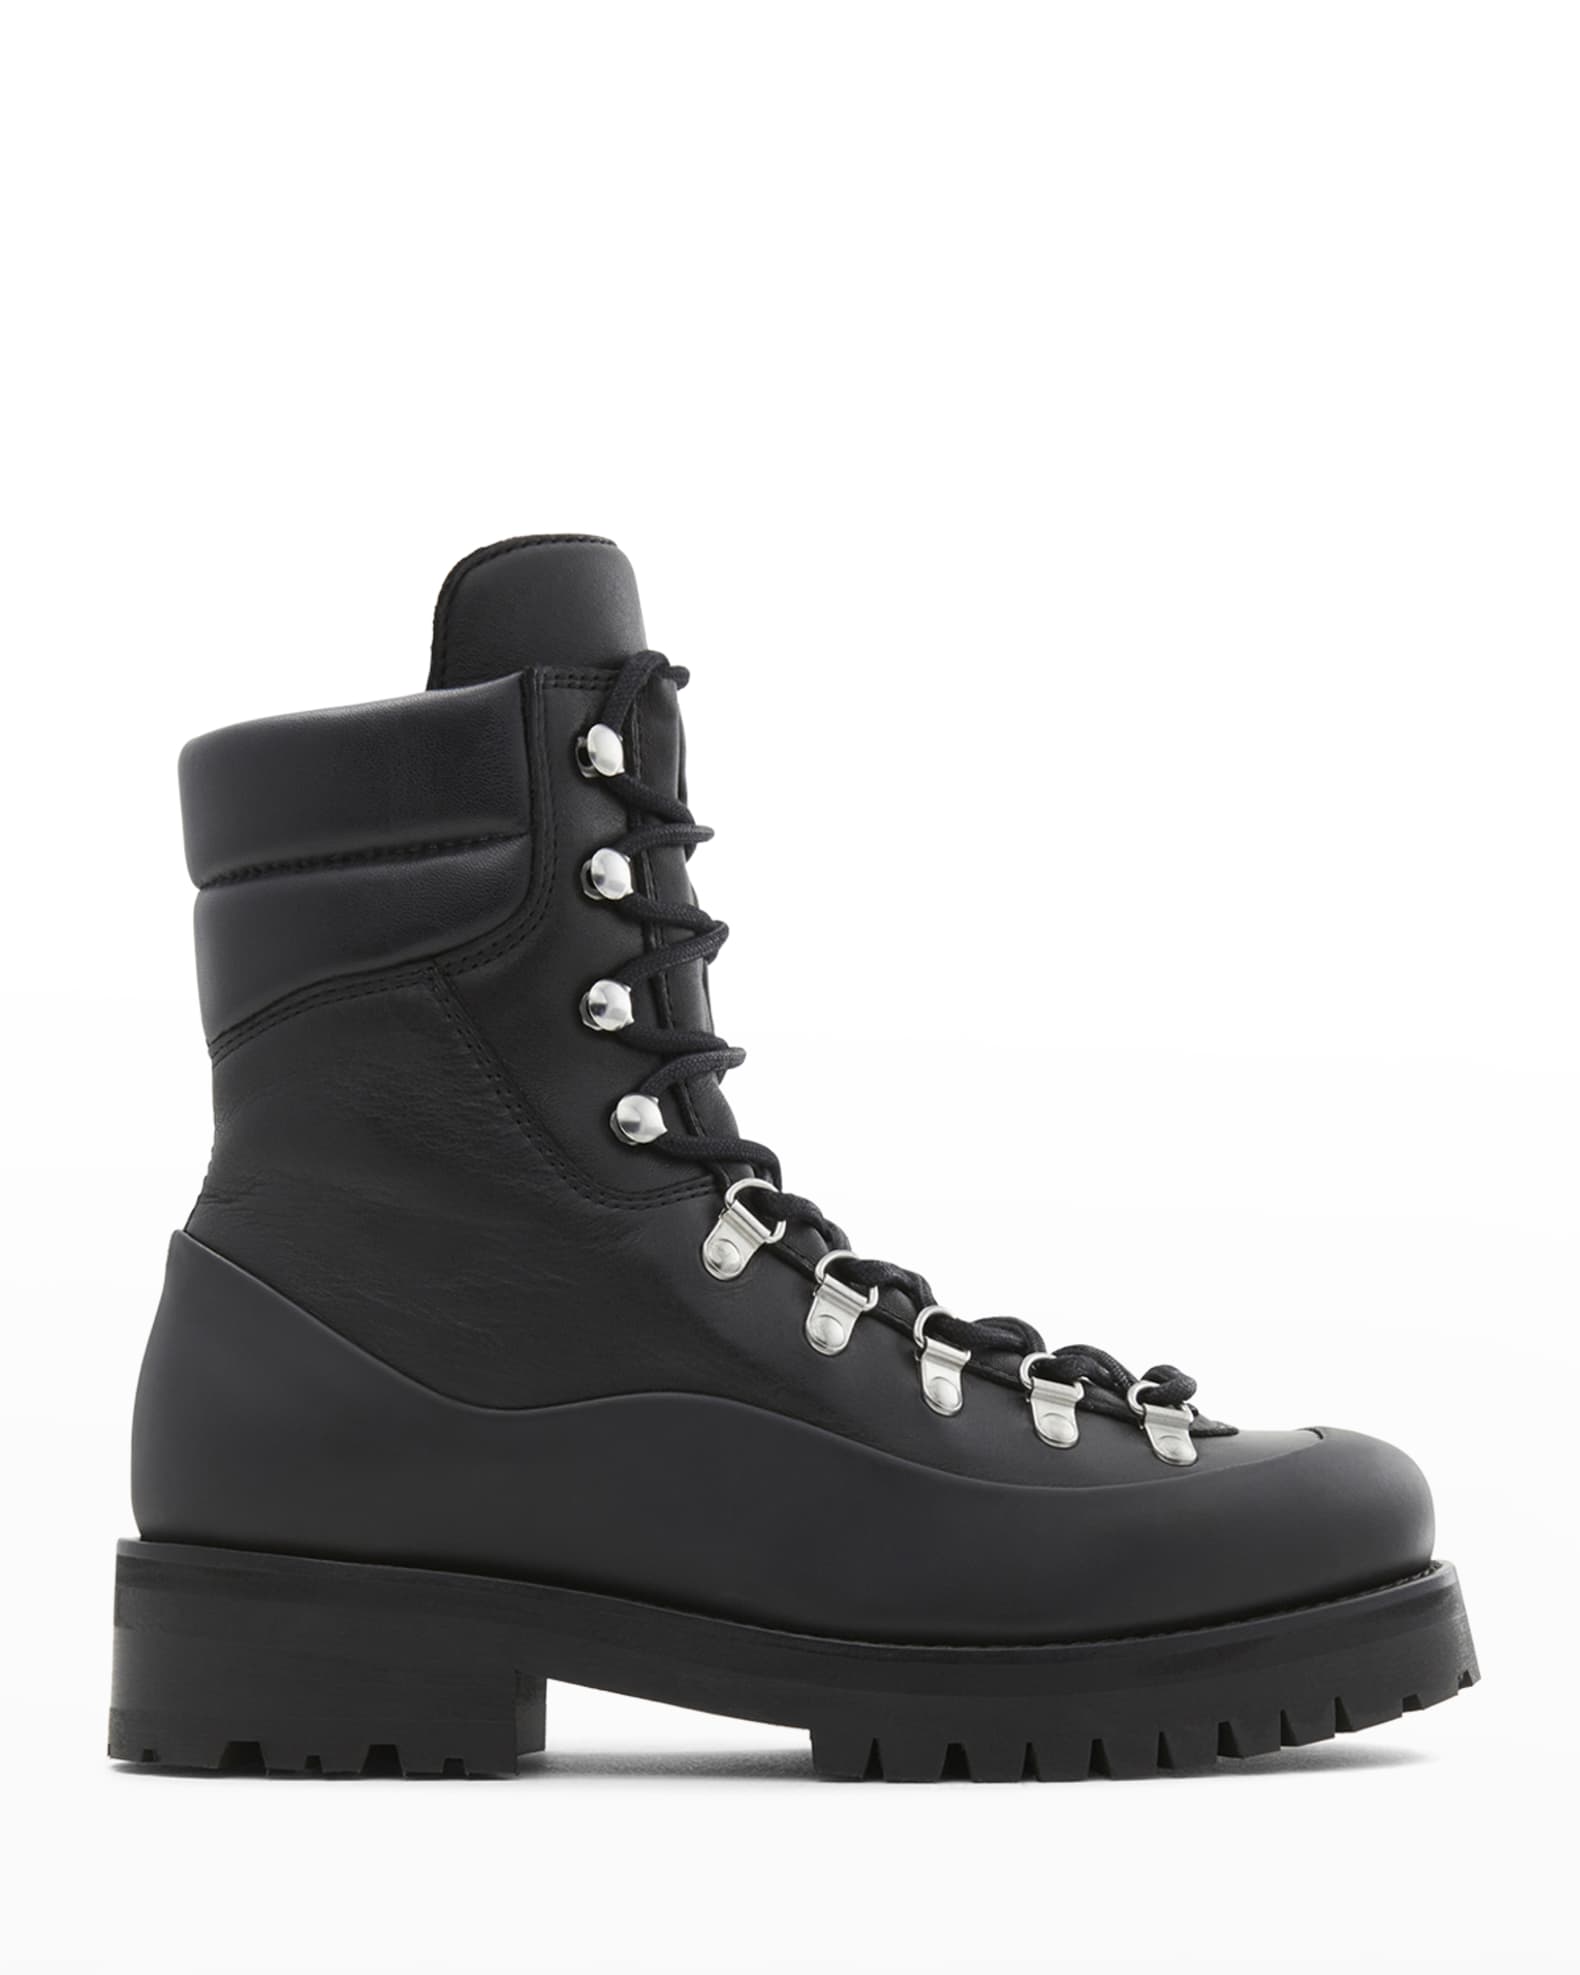 Belstaff Leather Lace-Up Mountain Boots | Neiman Marcus